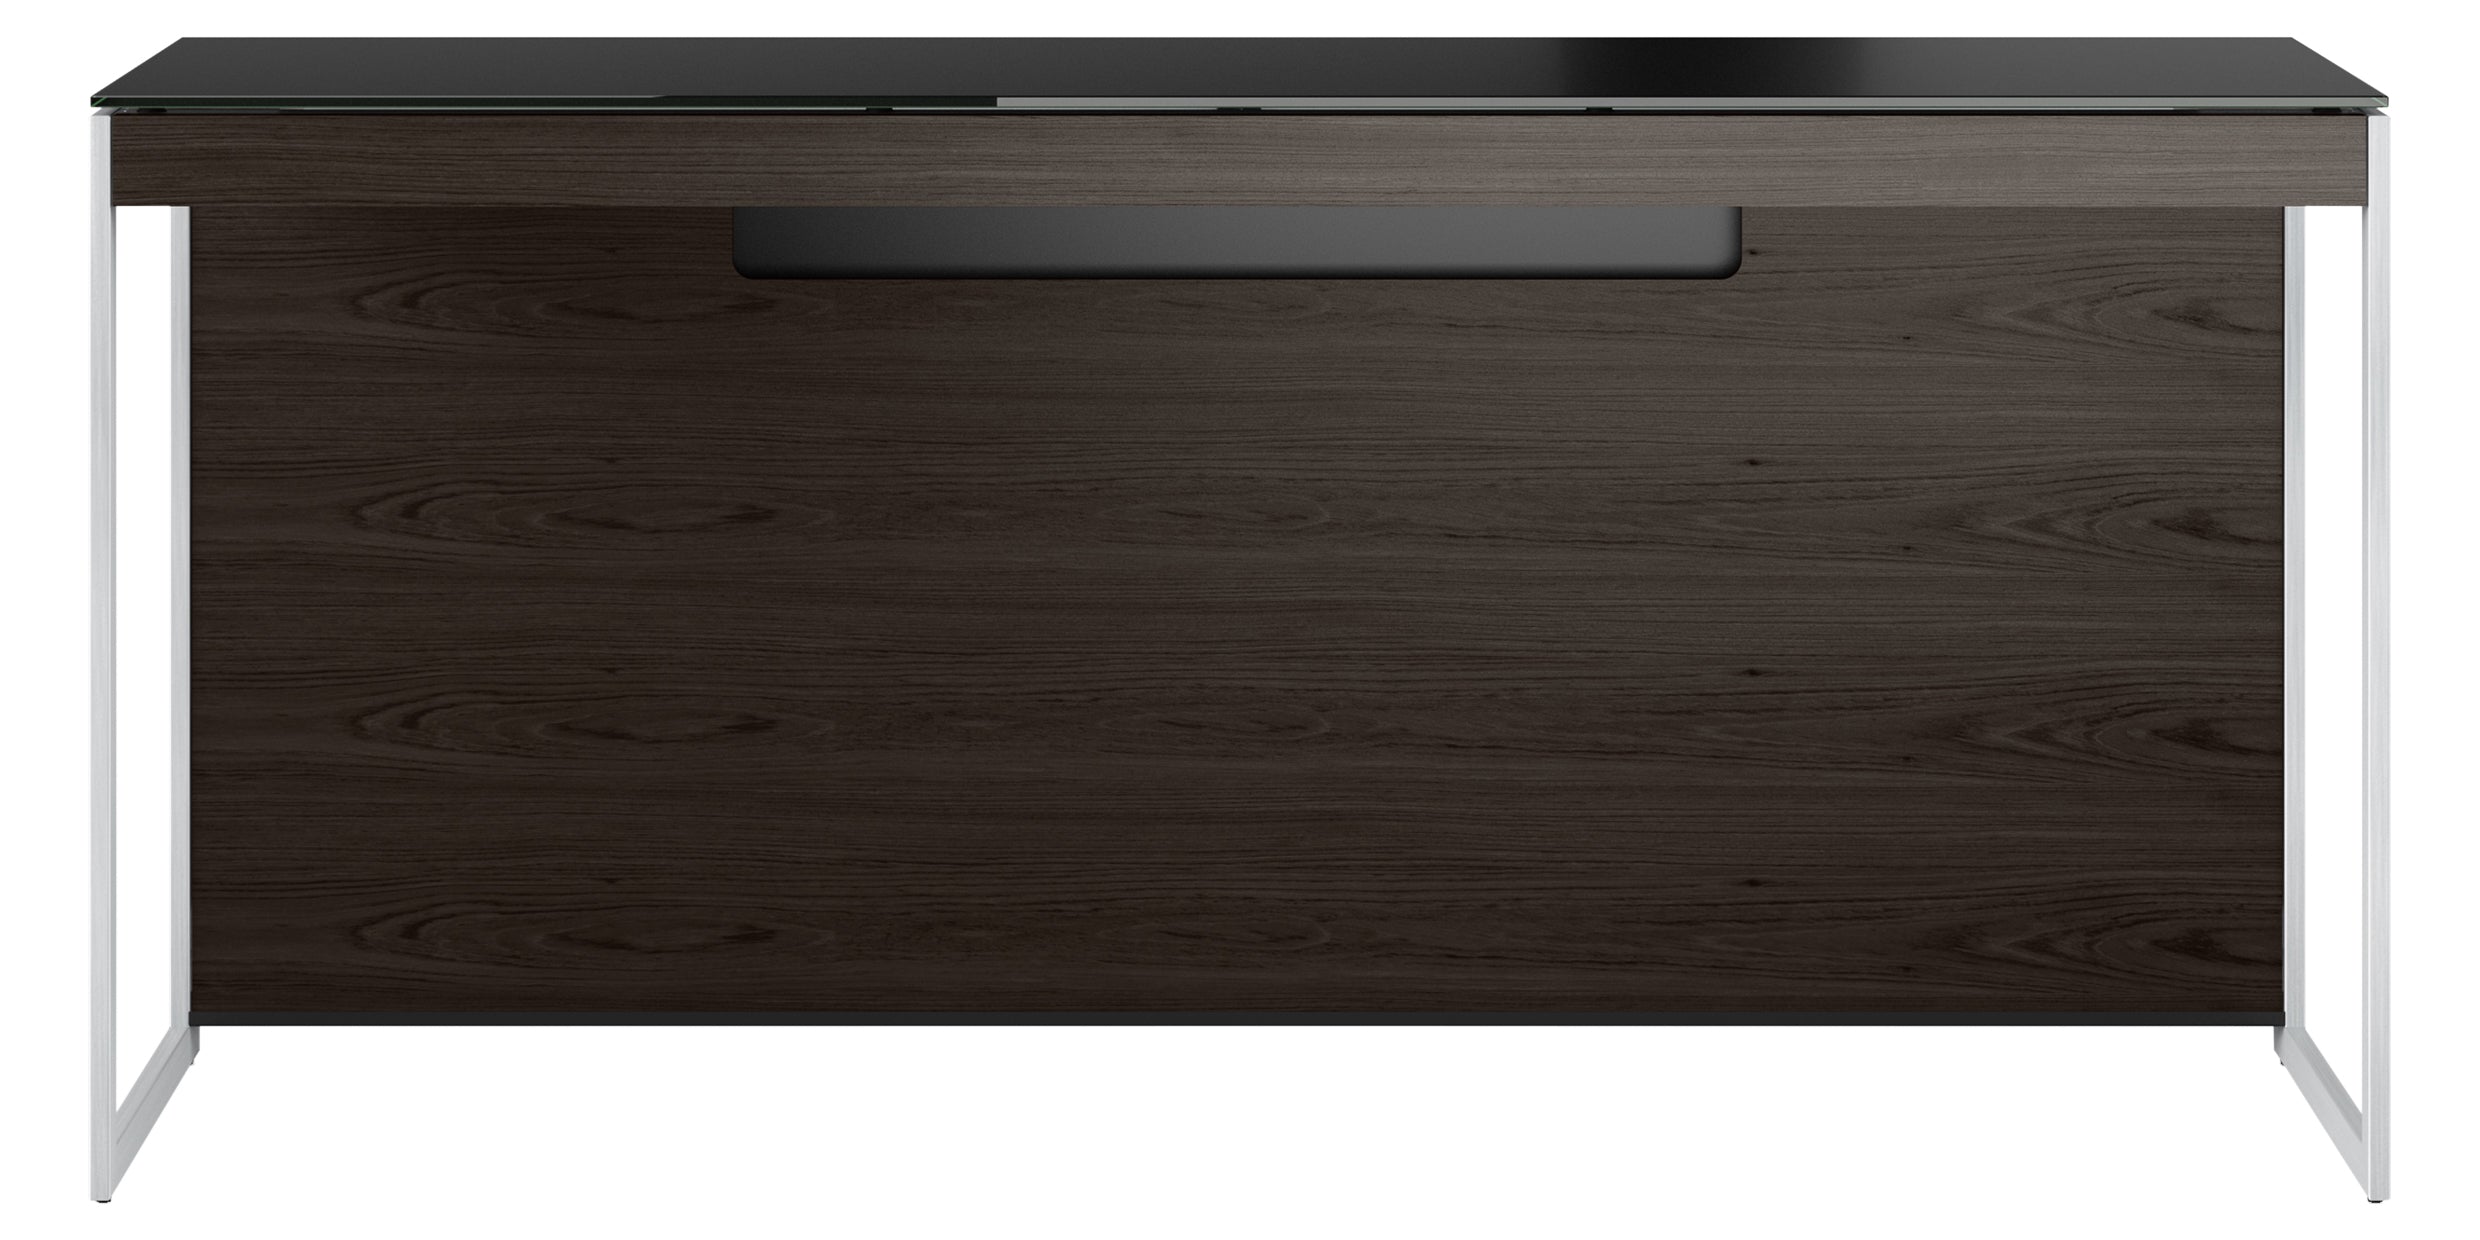 Charcoal Ash Veneer and Black Satin-Etched Glass with Satin Nickel Steel | BDI Sequel Laptop Desk | Valley Ridge Furniture